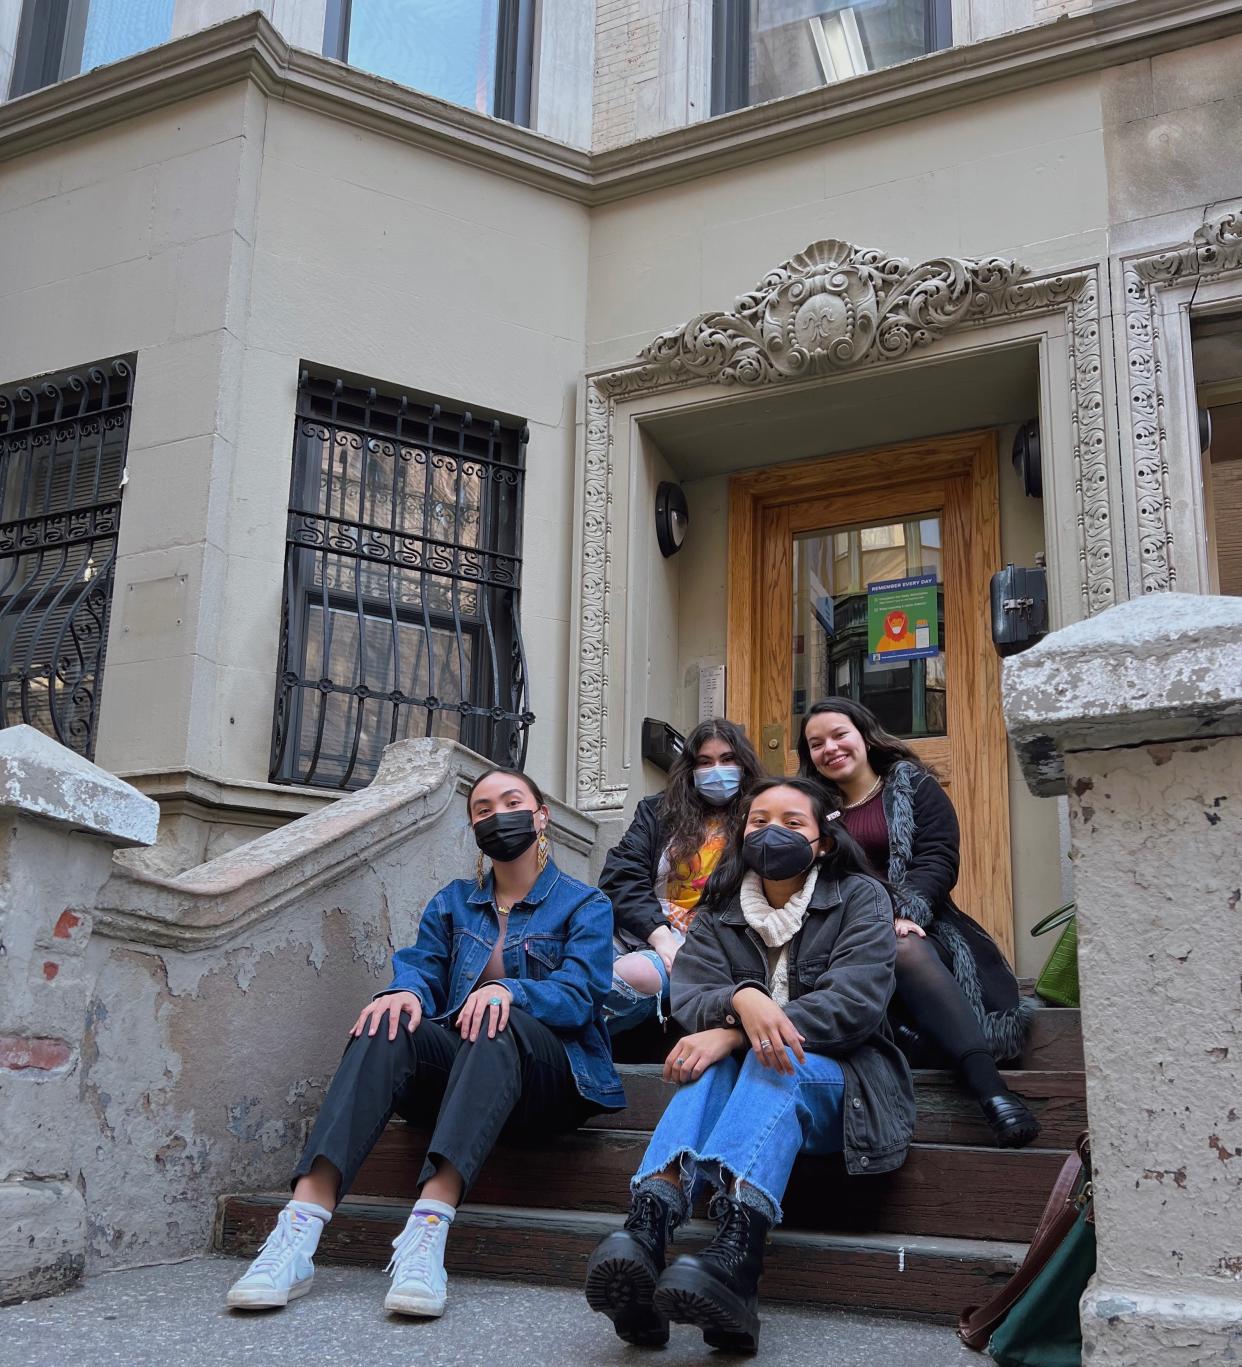 Columbia University students, Charitie Ropati, Hannah Jimenez, Kianna Pete and Eva Brander Blackhawk sit on the stoop of the brownstone that will become Indigehouse in New York City. (Photo/Courtesy Charitie Ropati)